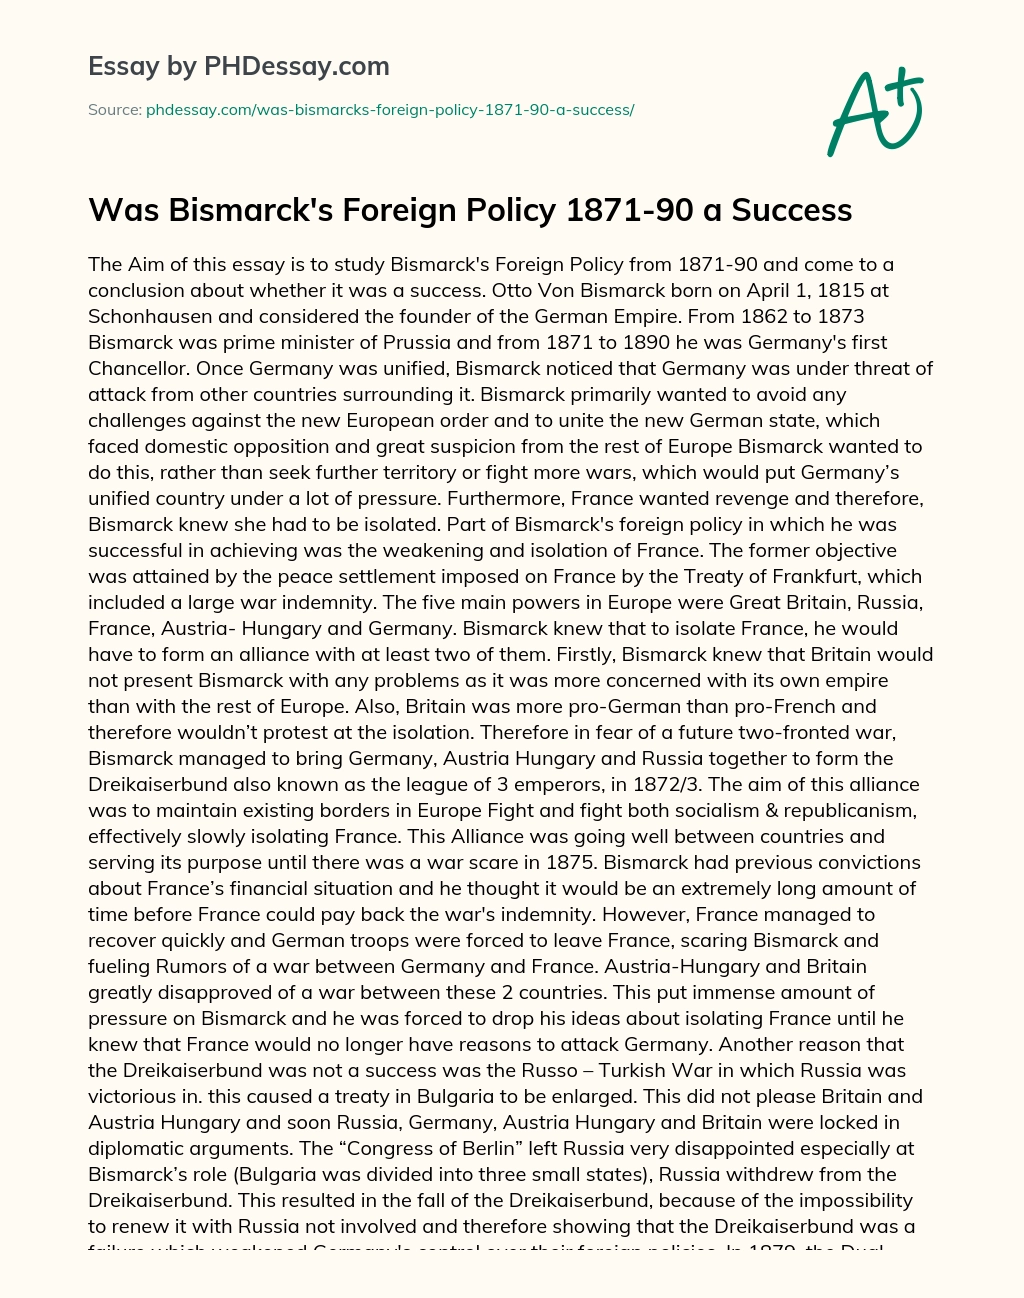 Was Bismarck’s Foreign Policy 1871-90 a Success essay